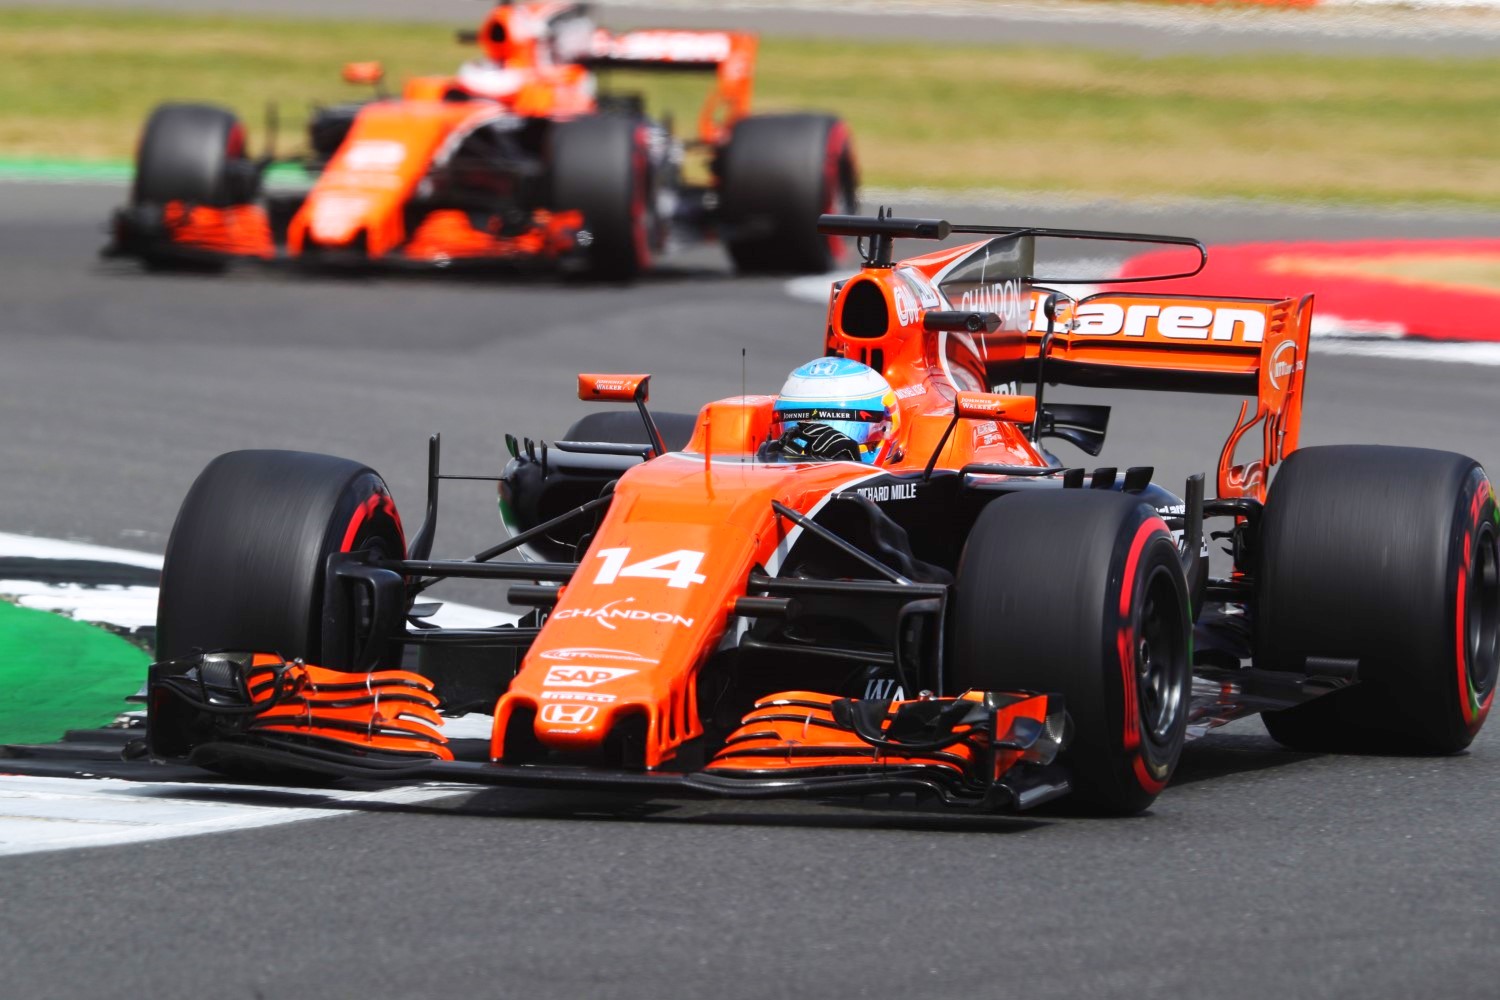 McLaren wants to keep both of its drivers